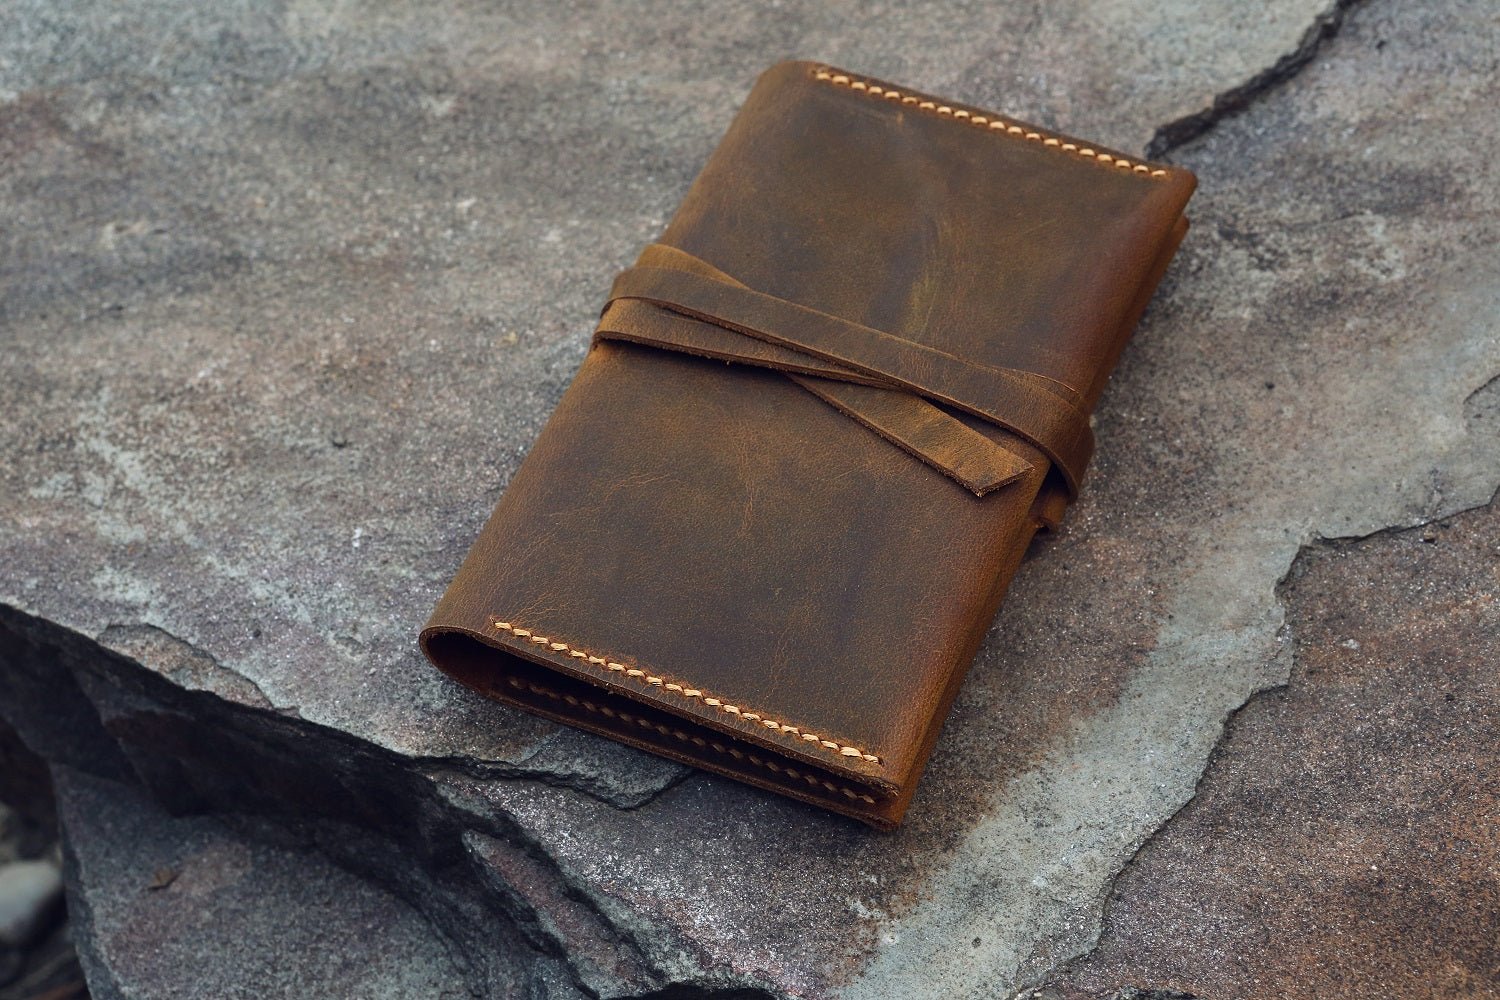 https://cdn.shopify.com/s/files/1/1794/7261/products/distressed-leather-field-notes-holder-field-notes-edc-cover-914984.jpg?v=1696127645